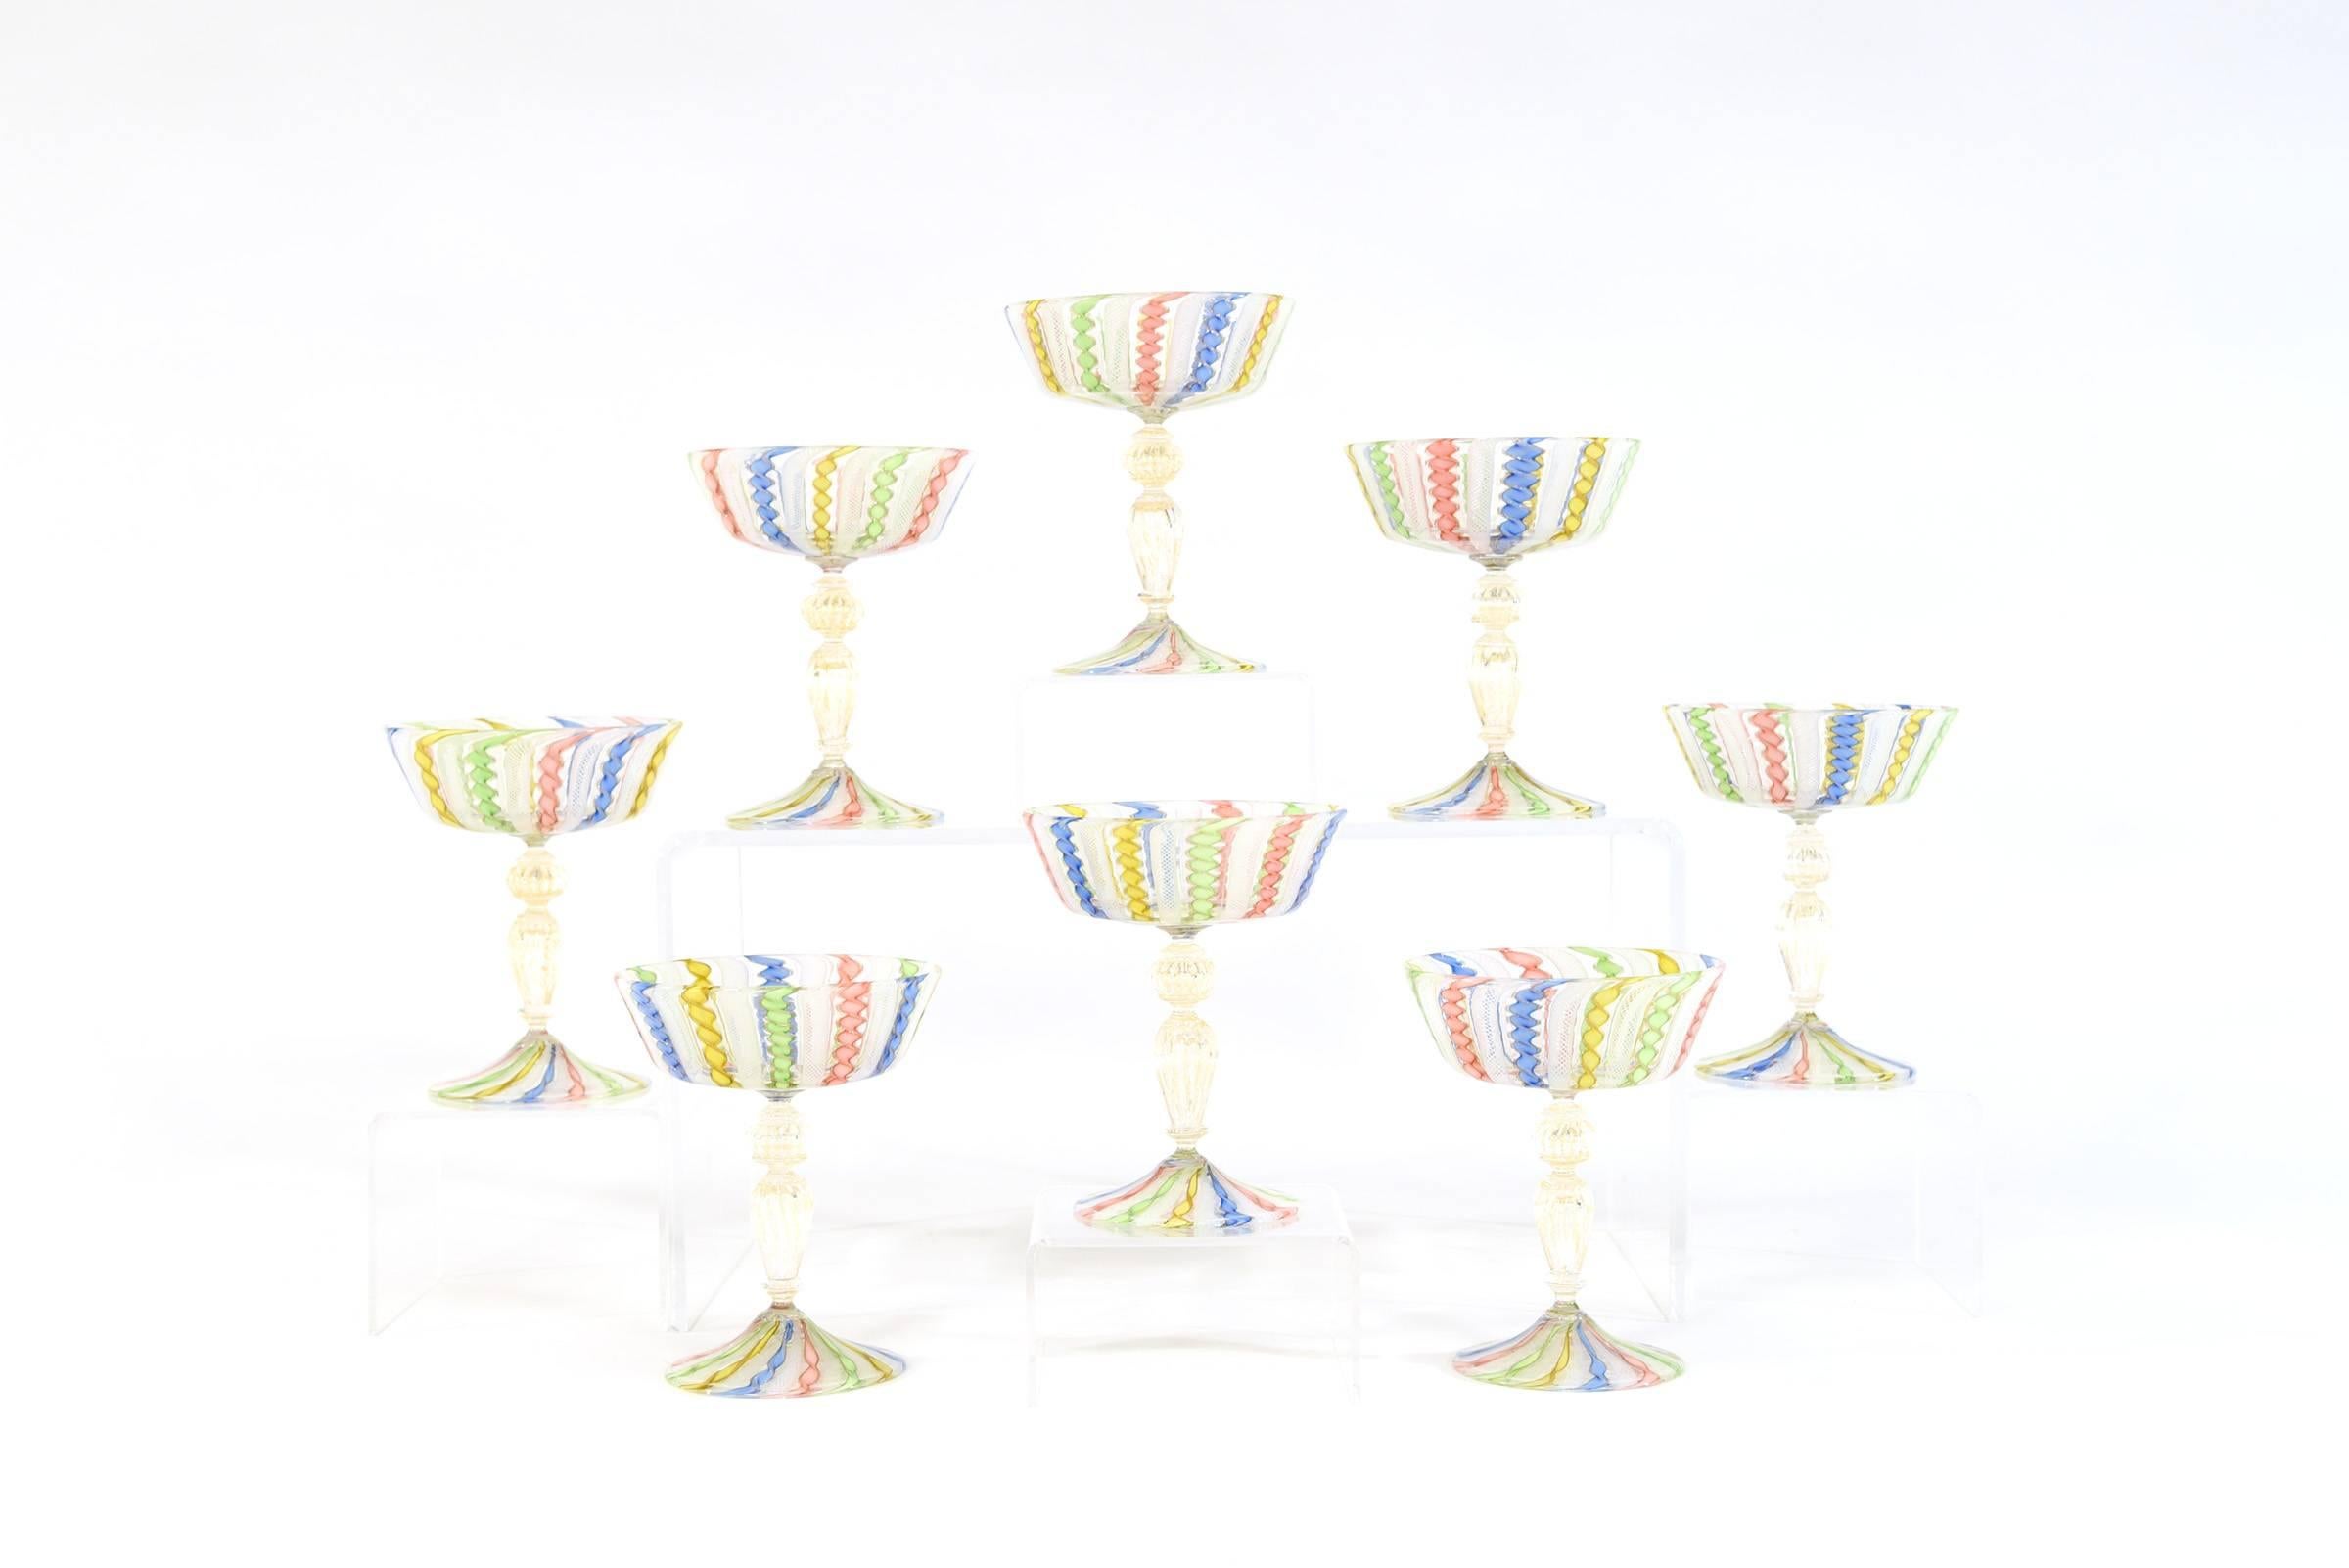 This set of eight champagne goblets was made in Murano and exhibit the master glassblowing techniques of Salviati. The alternating multicolor and gold canes of latticcino encircle the bowl and foot with a gold leaf infused stem, which creates an